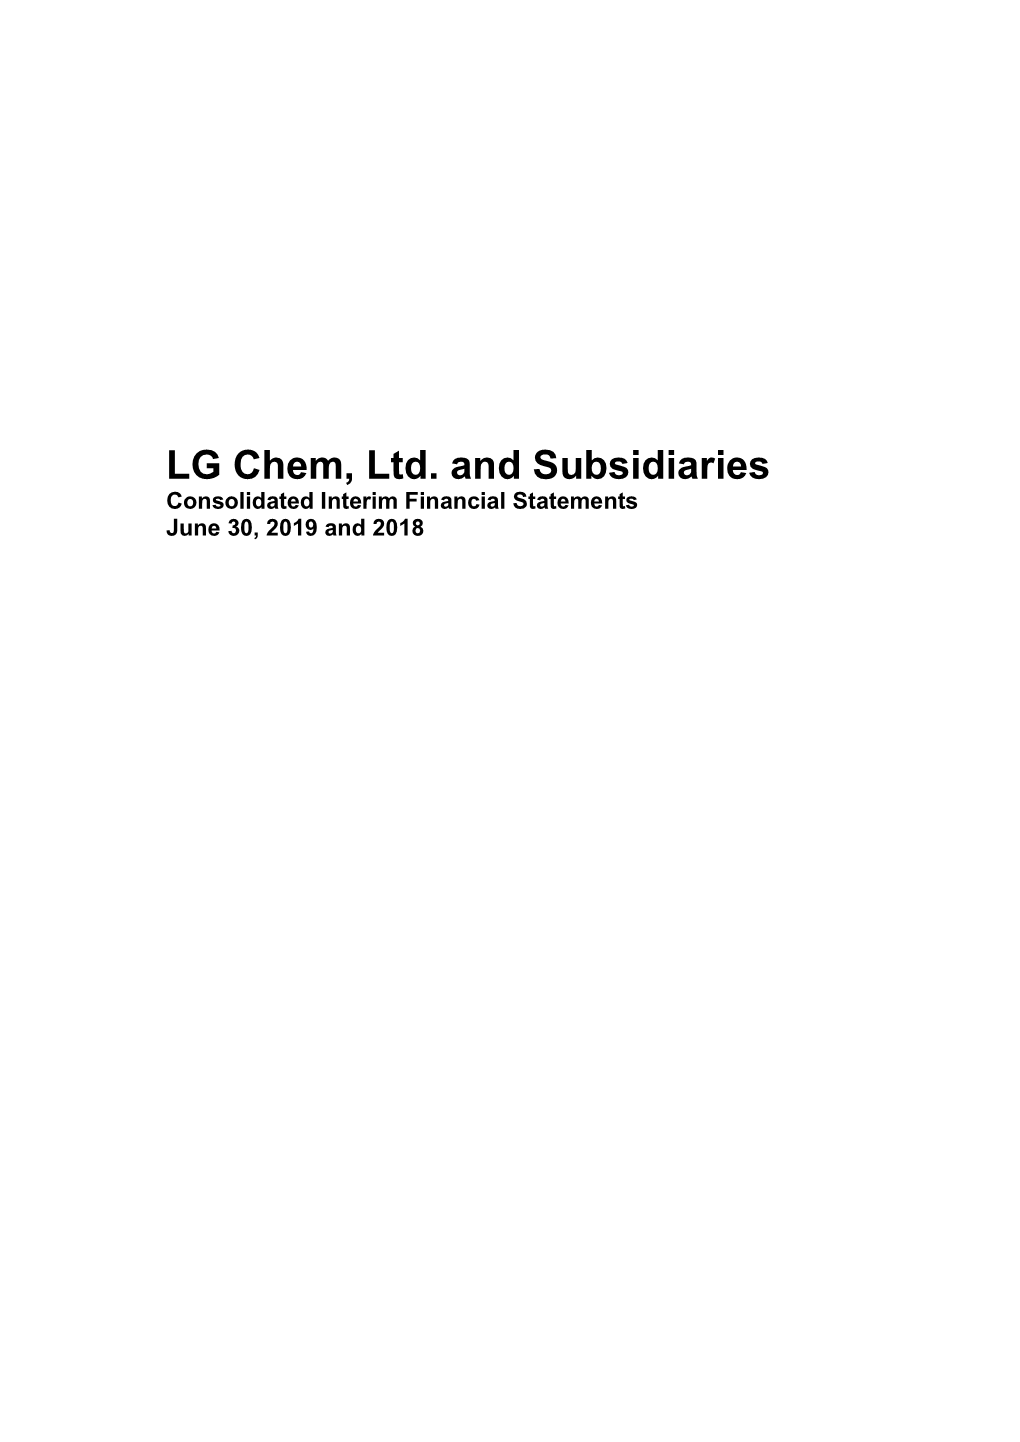 LG Chem, Ltd. and Subsidiaries Consolidated Interim Financial Statements June 30, 2019 and 2018